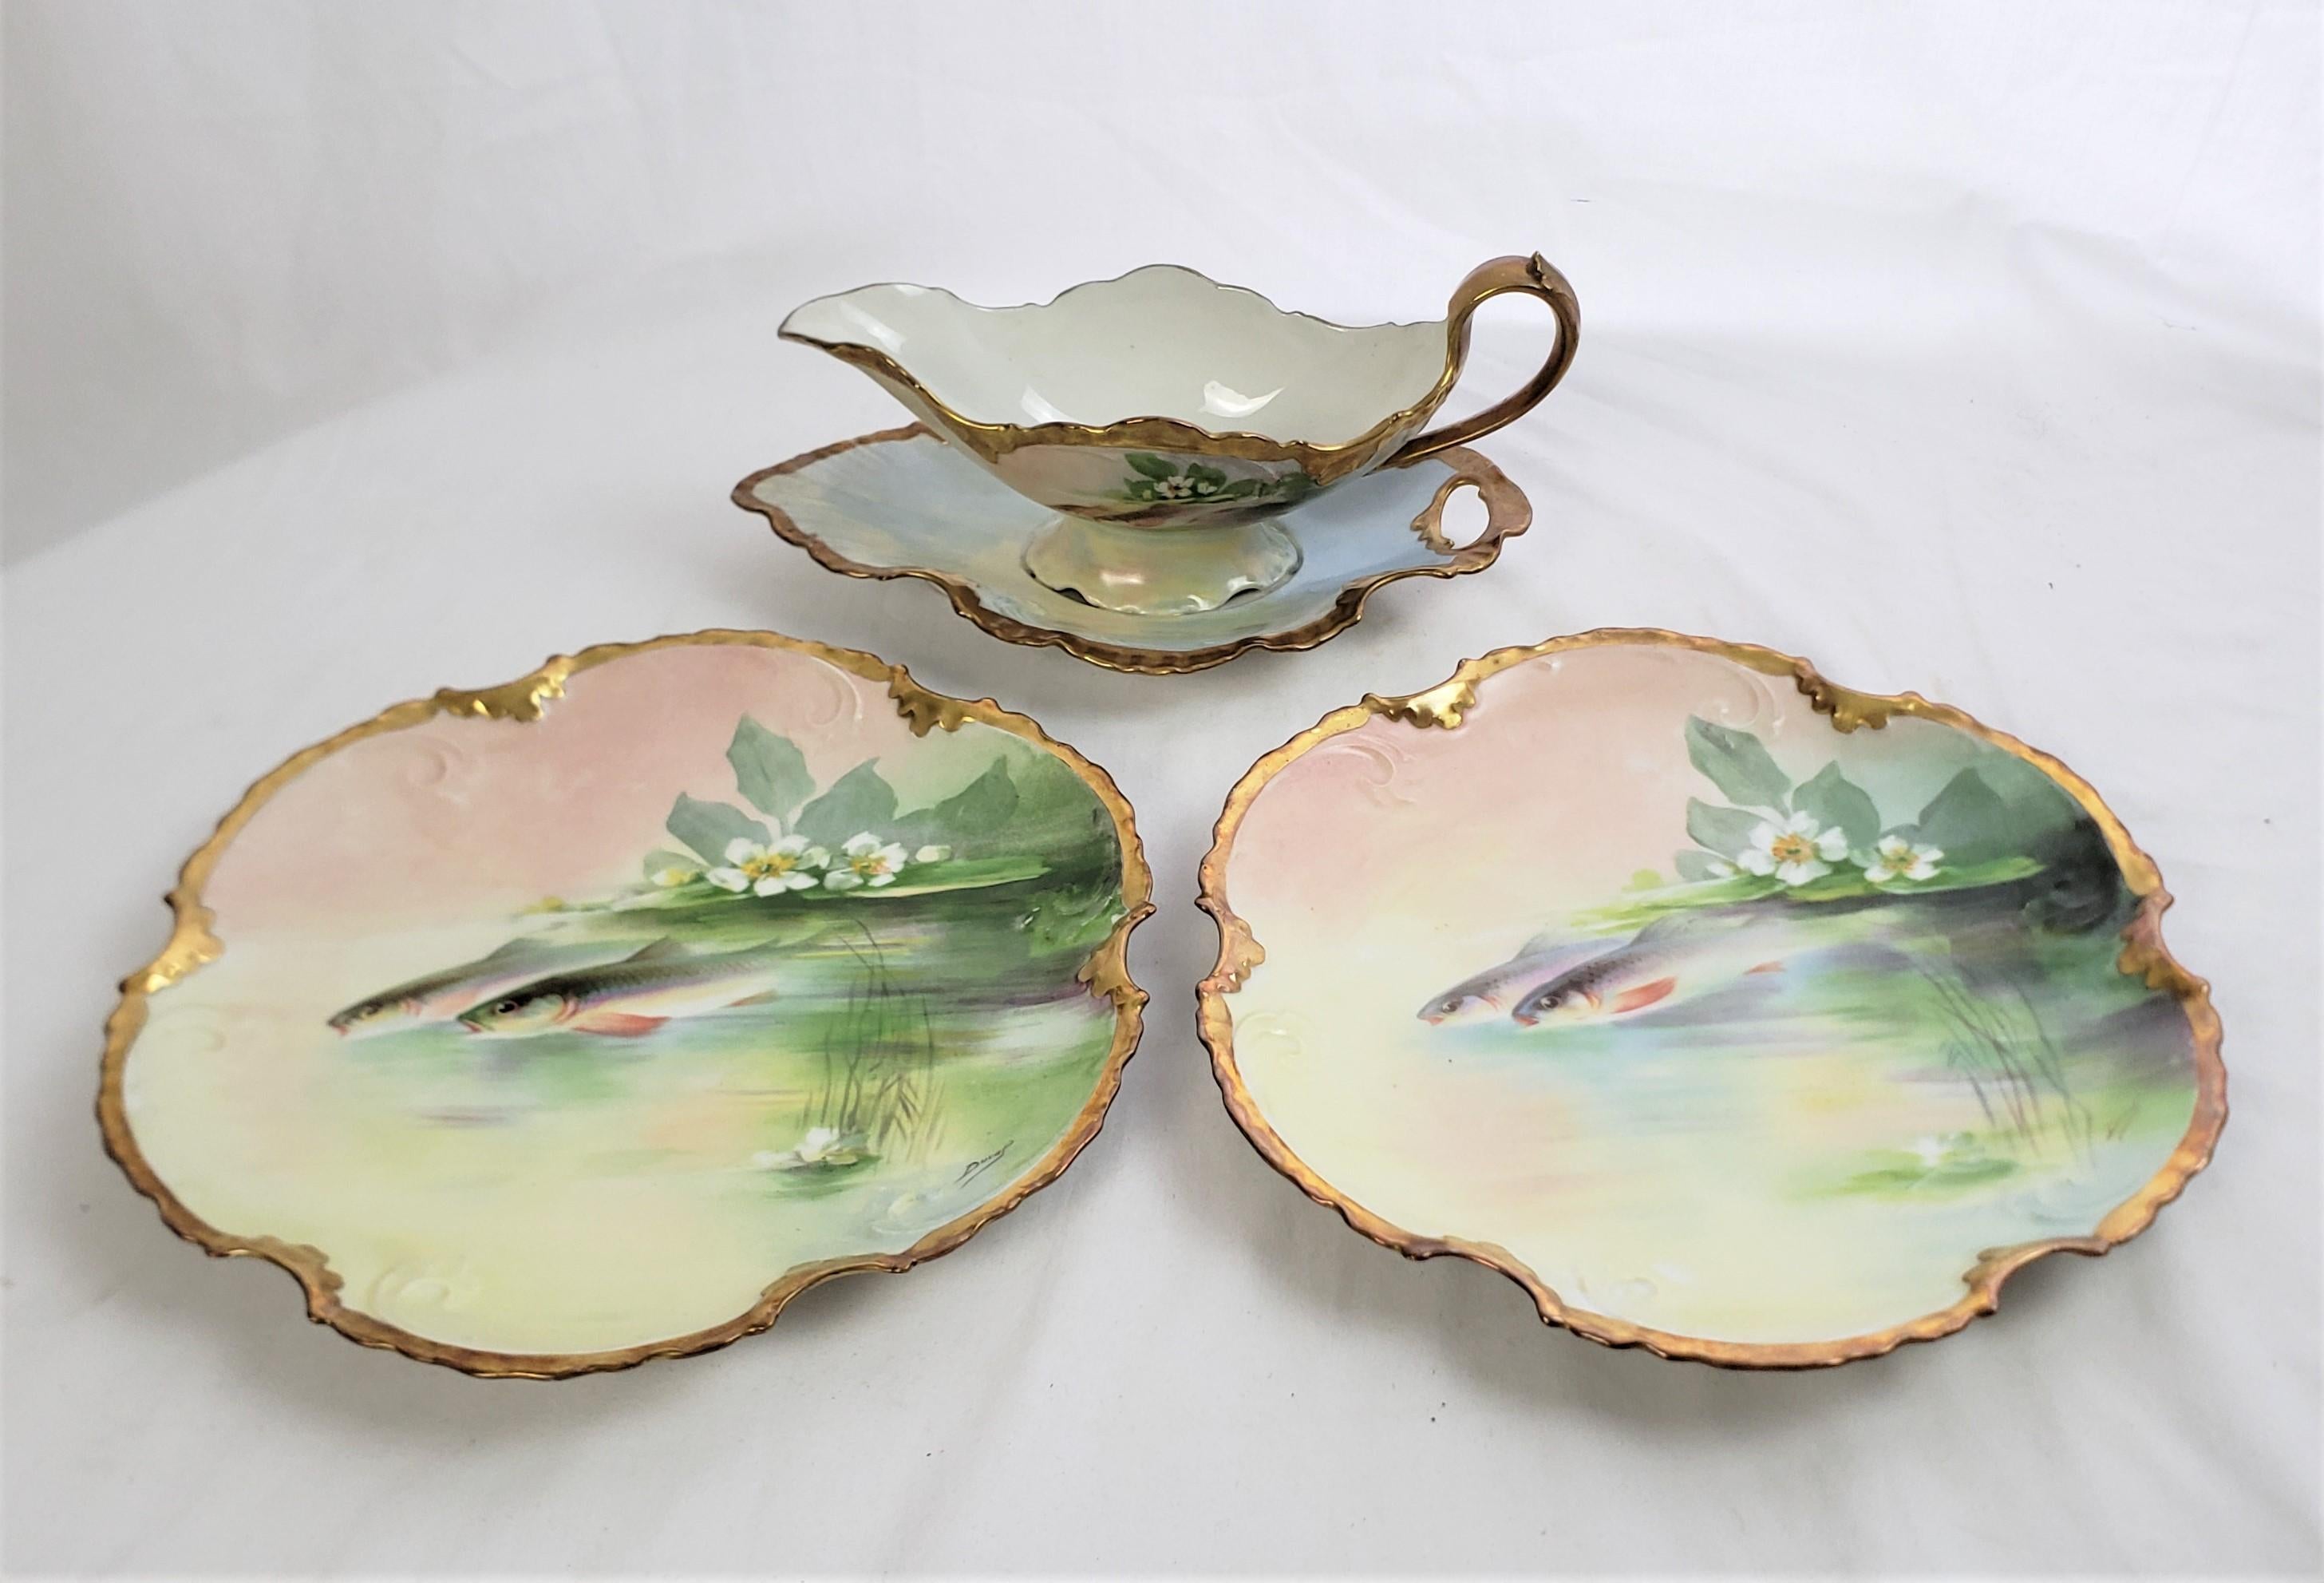 Antique Limoges Hand-Painted Fish Set with Matching Platter & Sauce Boat For Sale 3